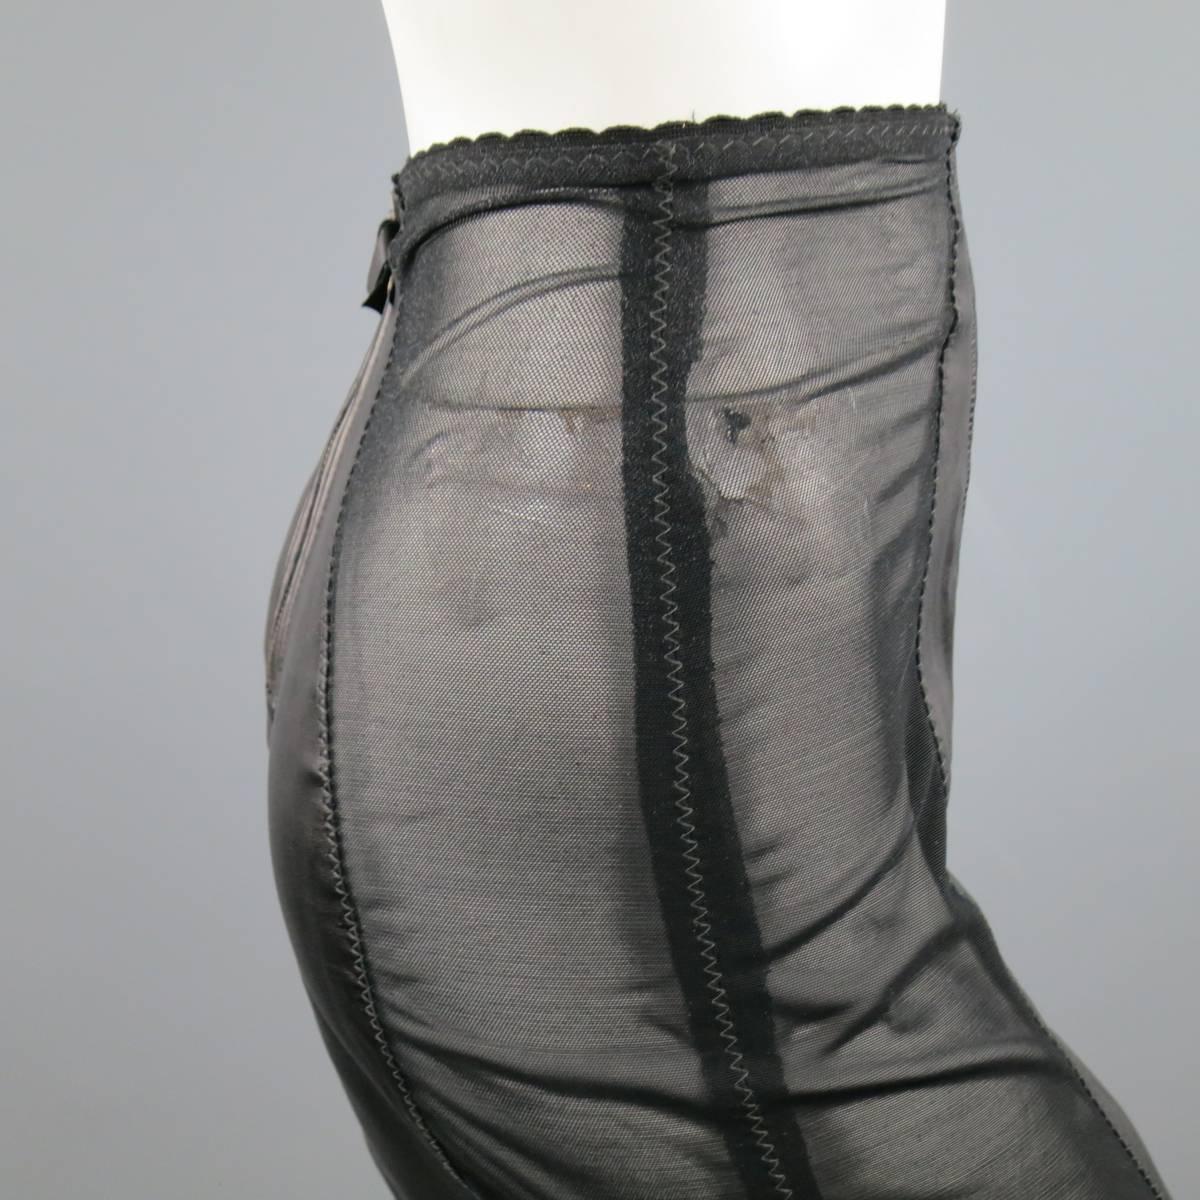 Jean Paul Gaultier Black Leather and Mesh Panel Girdle Pencil Skirt 1